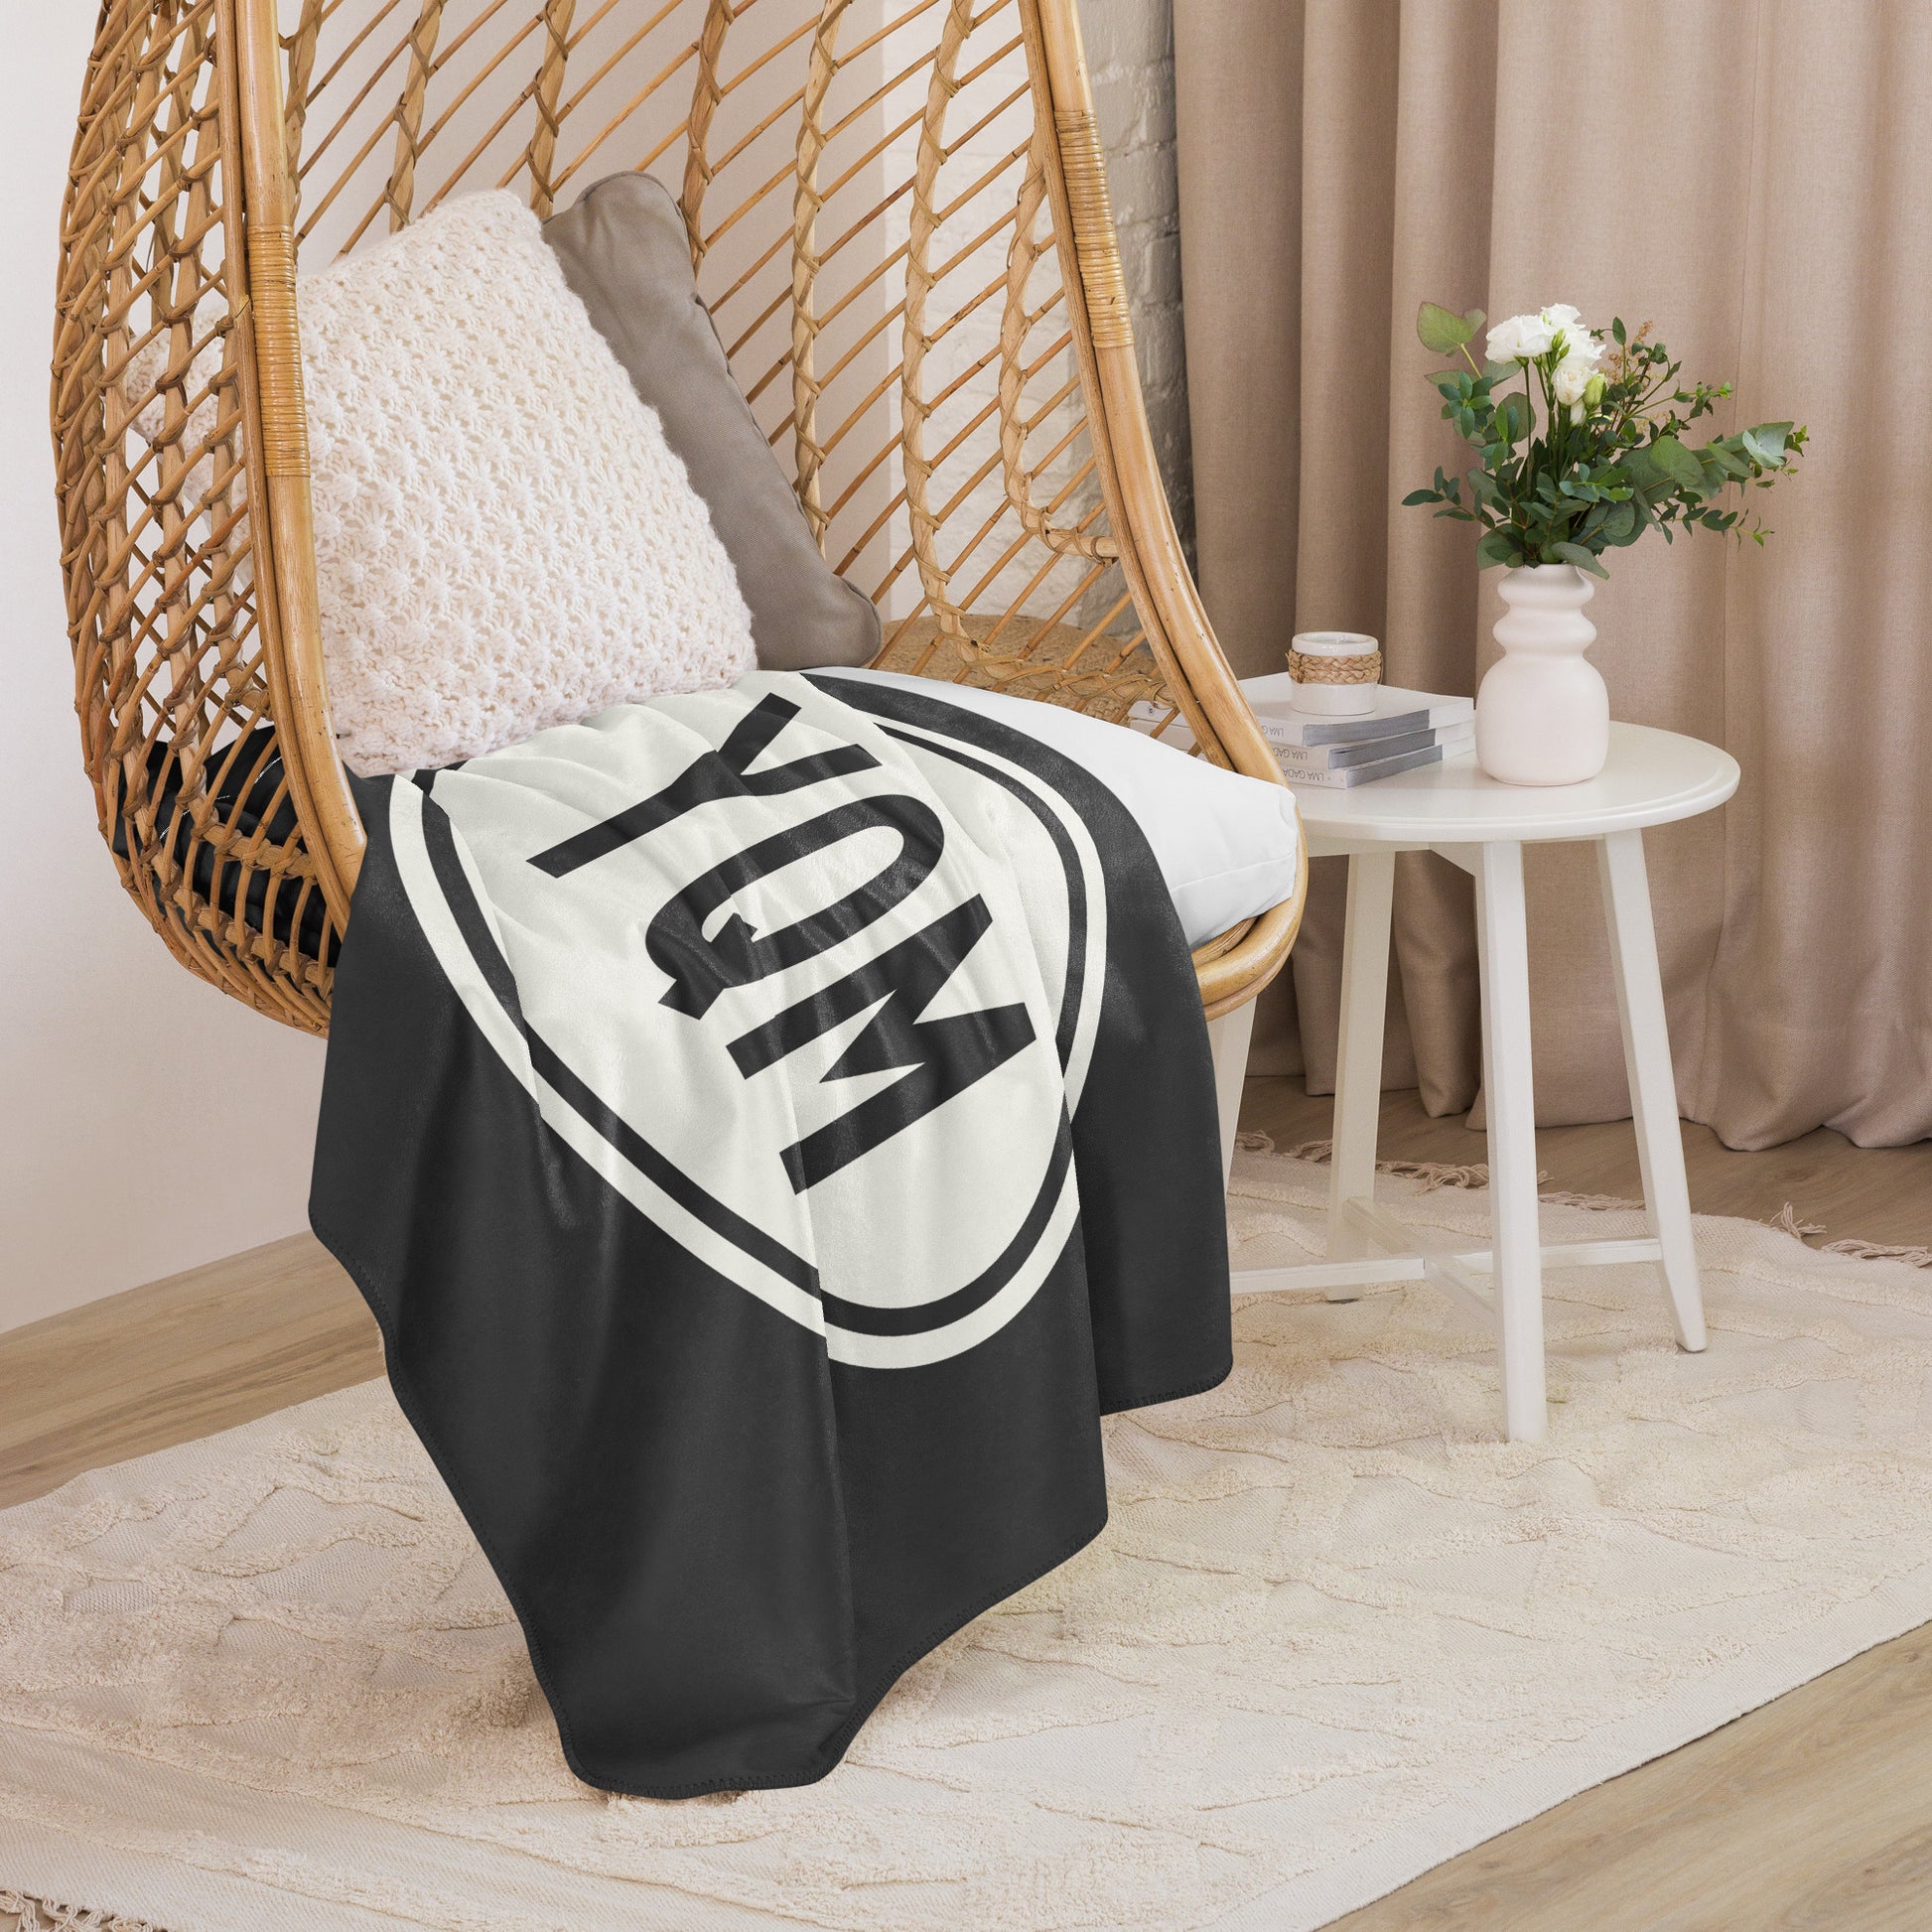 Unique Travel Gift Sherpa Blanket - White Oval • YQM Moncton • YHM Designs - Image 06